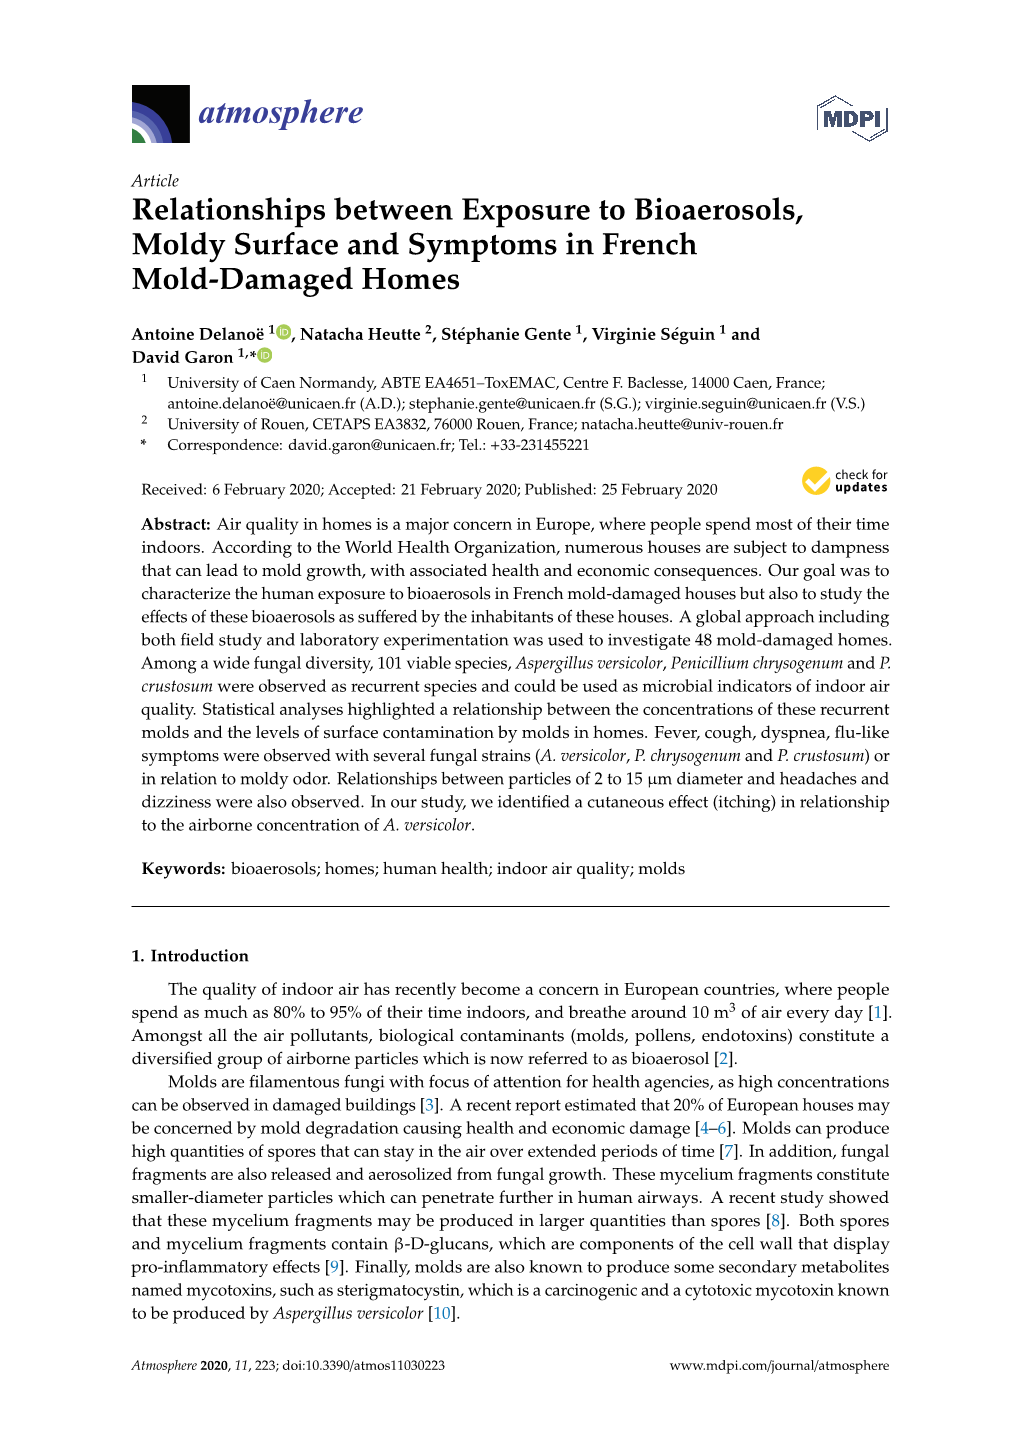 Relationships Between Exposure to Bioaerosols, Moldy Surface and Symptoms in French Mold-Damaged Homes